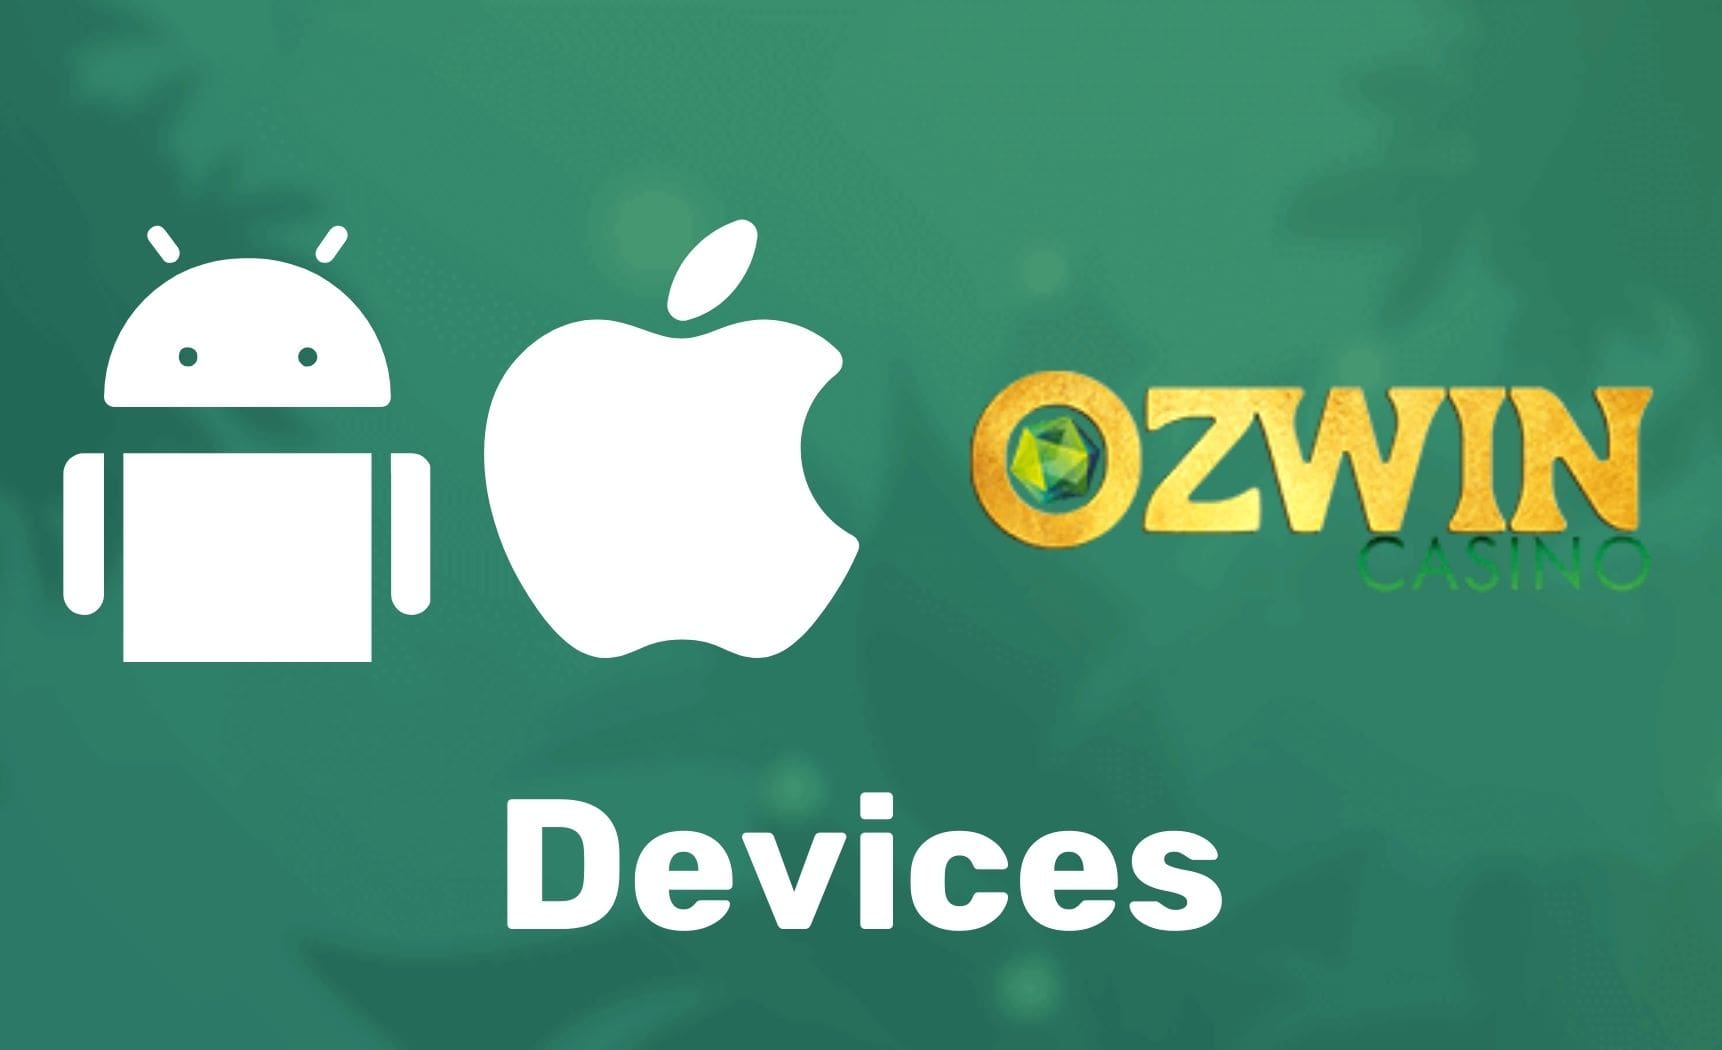 Ozwin Casino Devices for gaming overview